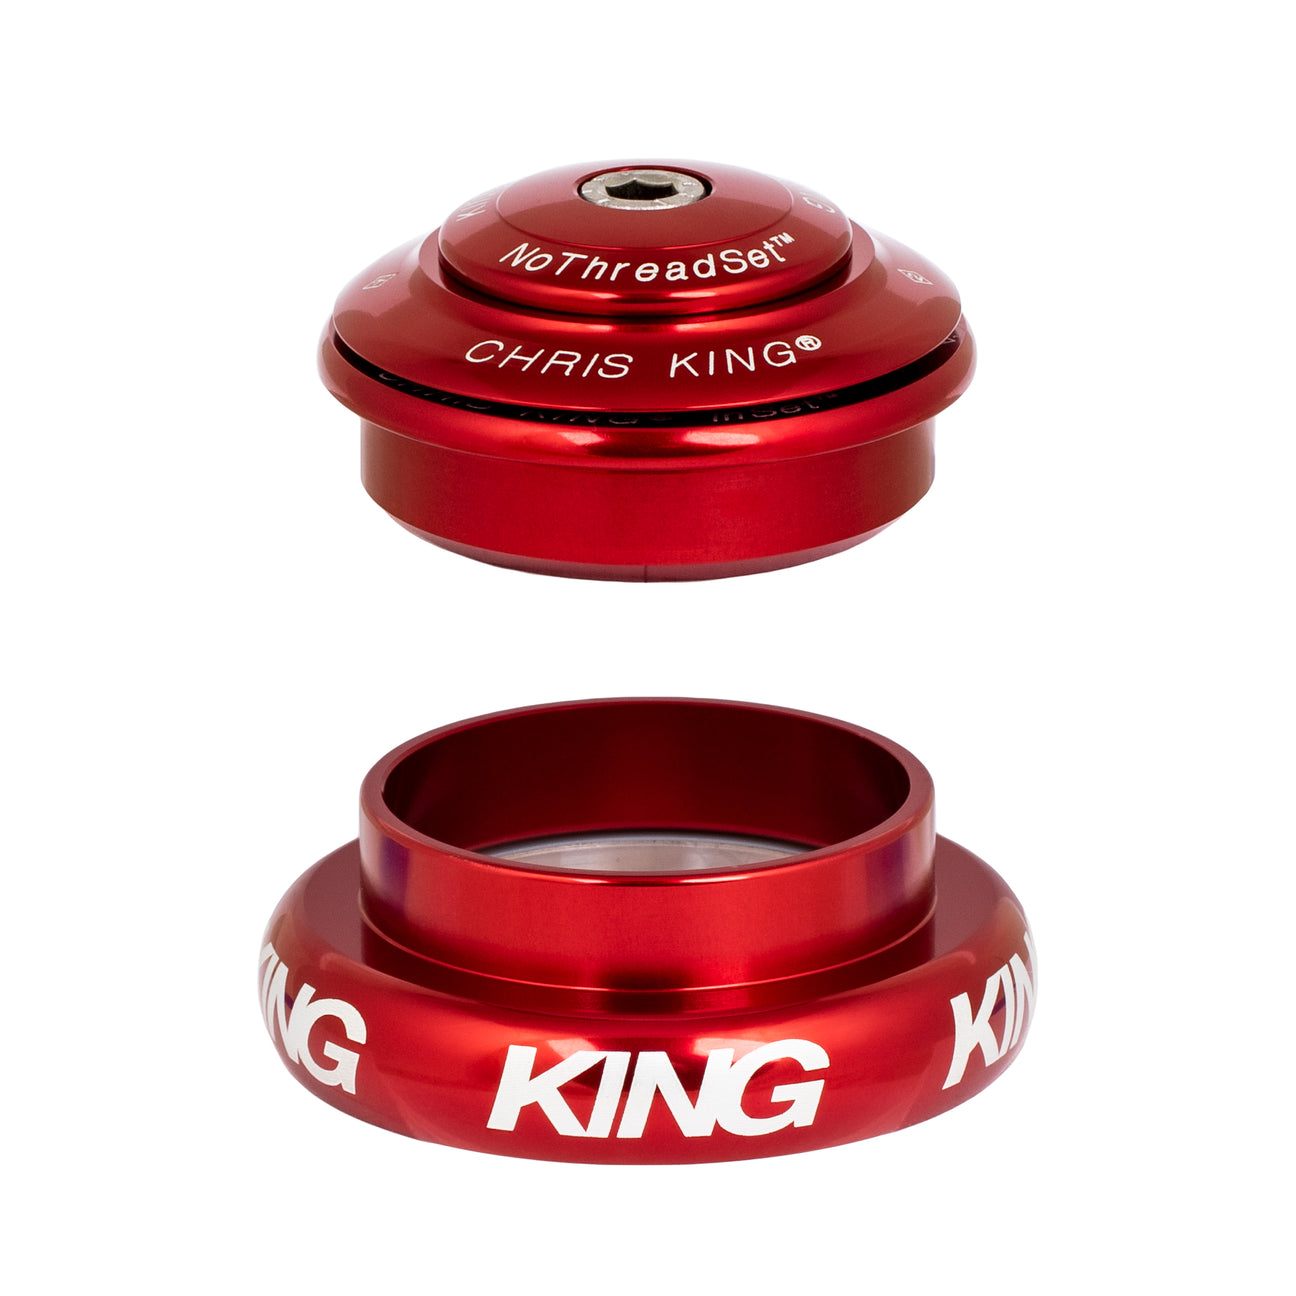 Chris King inset 7 headset in red